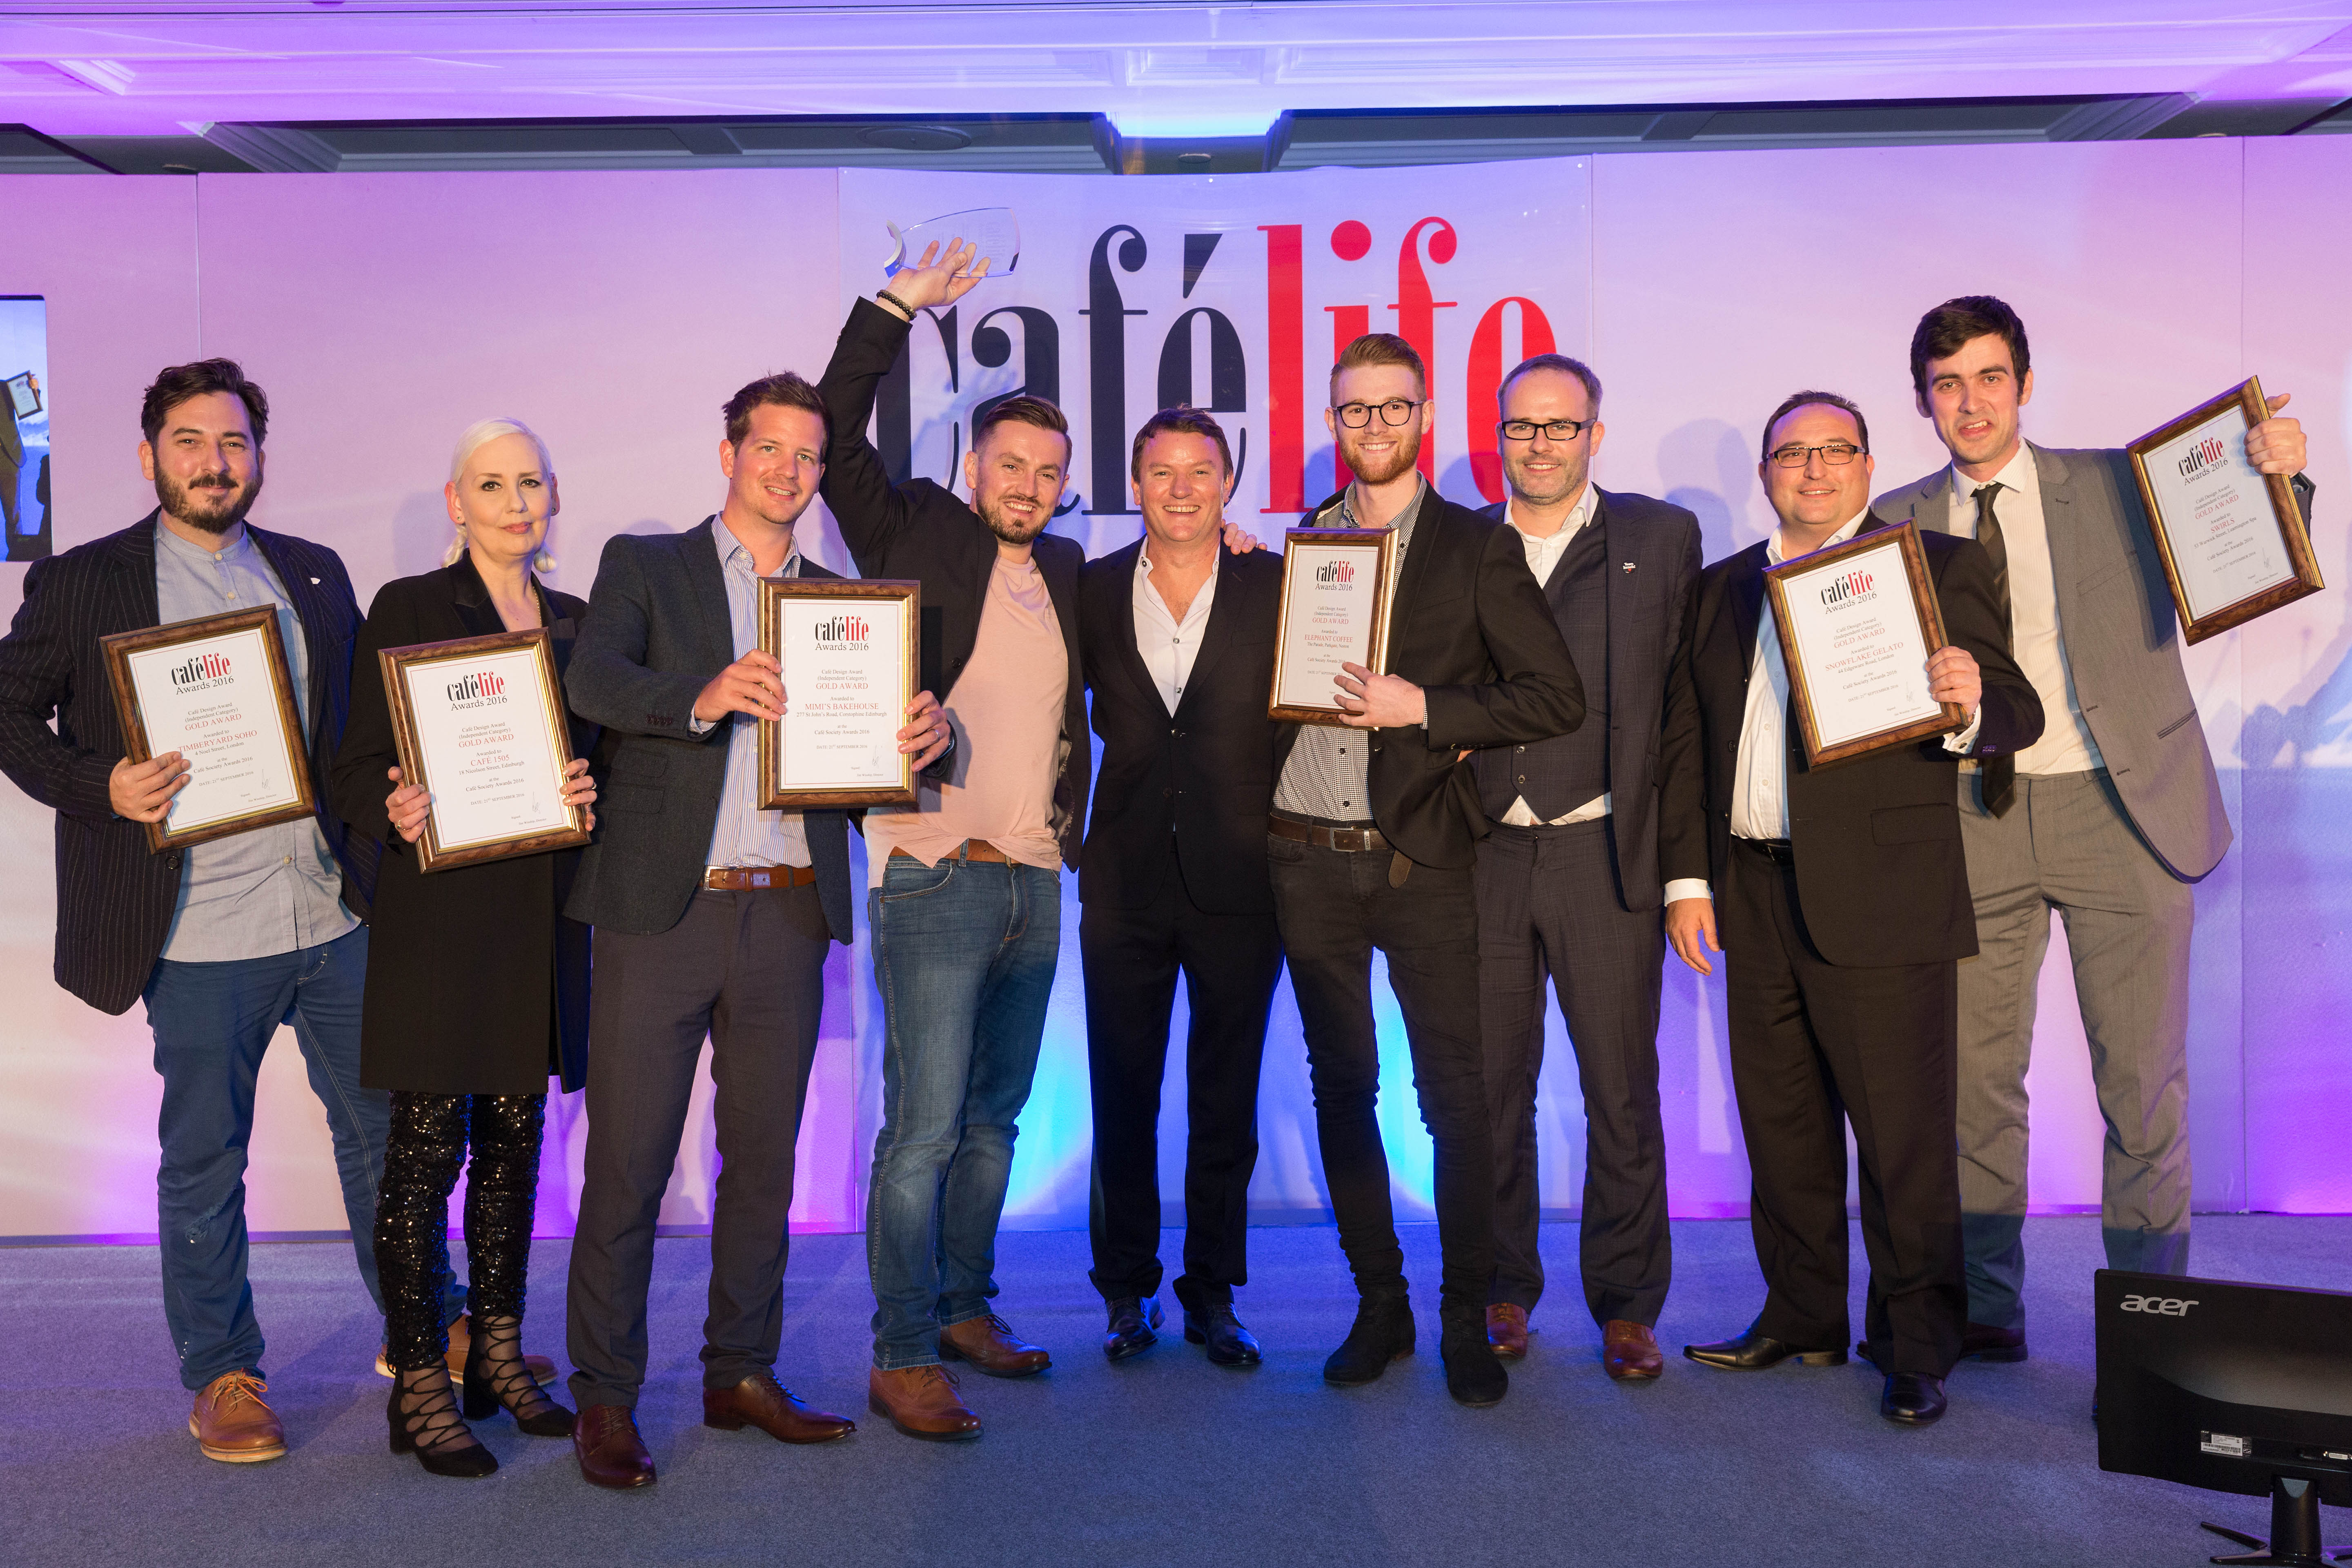 Cafelife competition and awards 2016